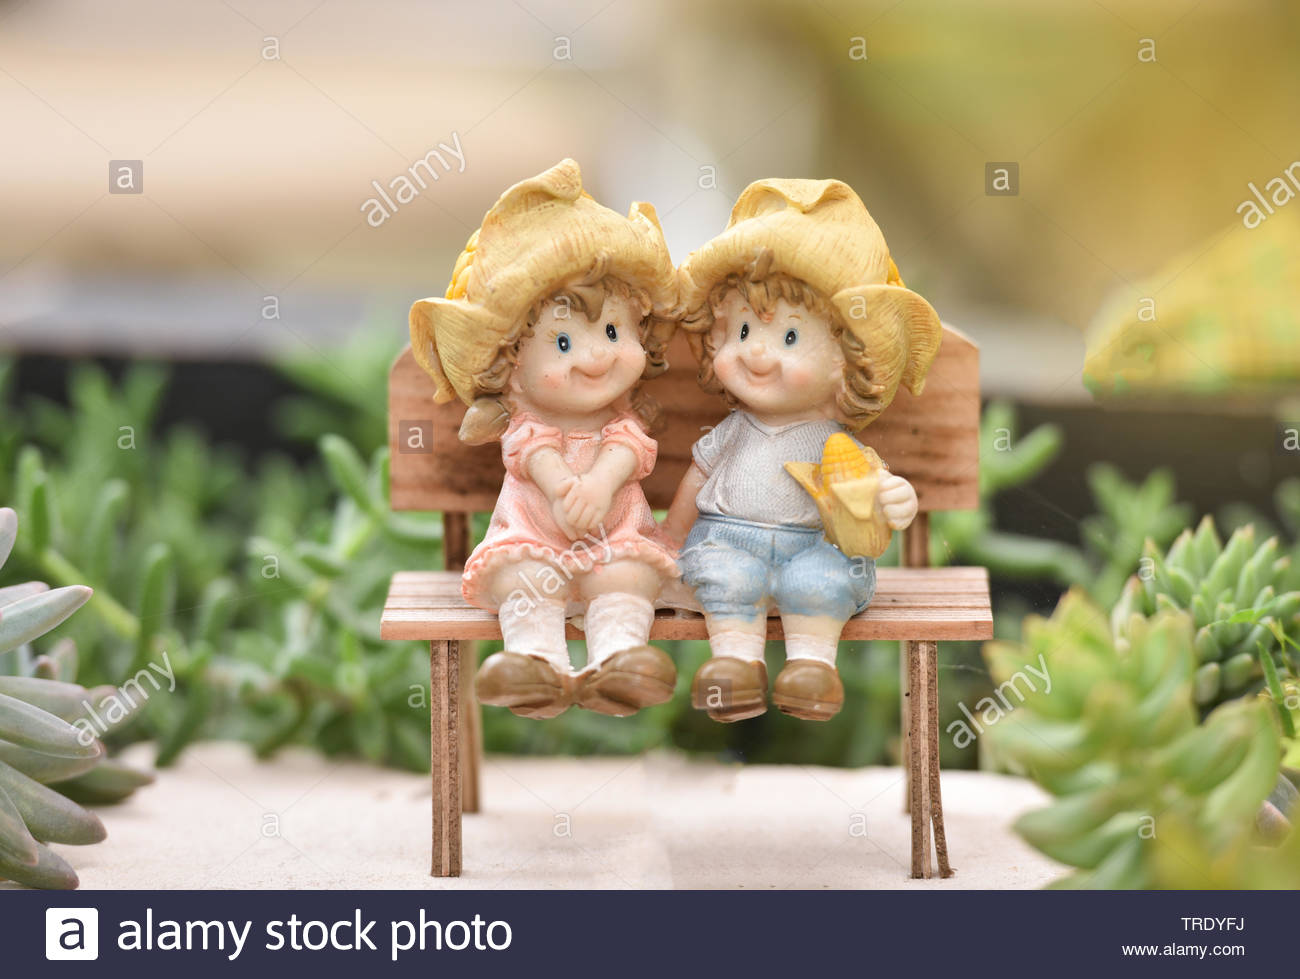 Little Couple Doll Cute Sitting On Wooden Bench Decorate The